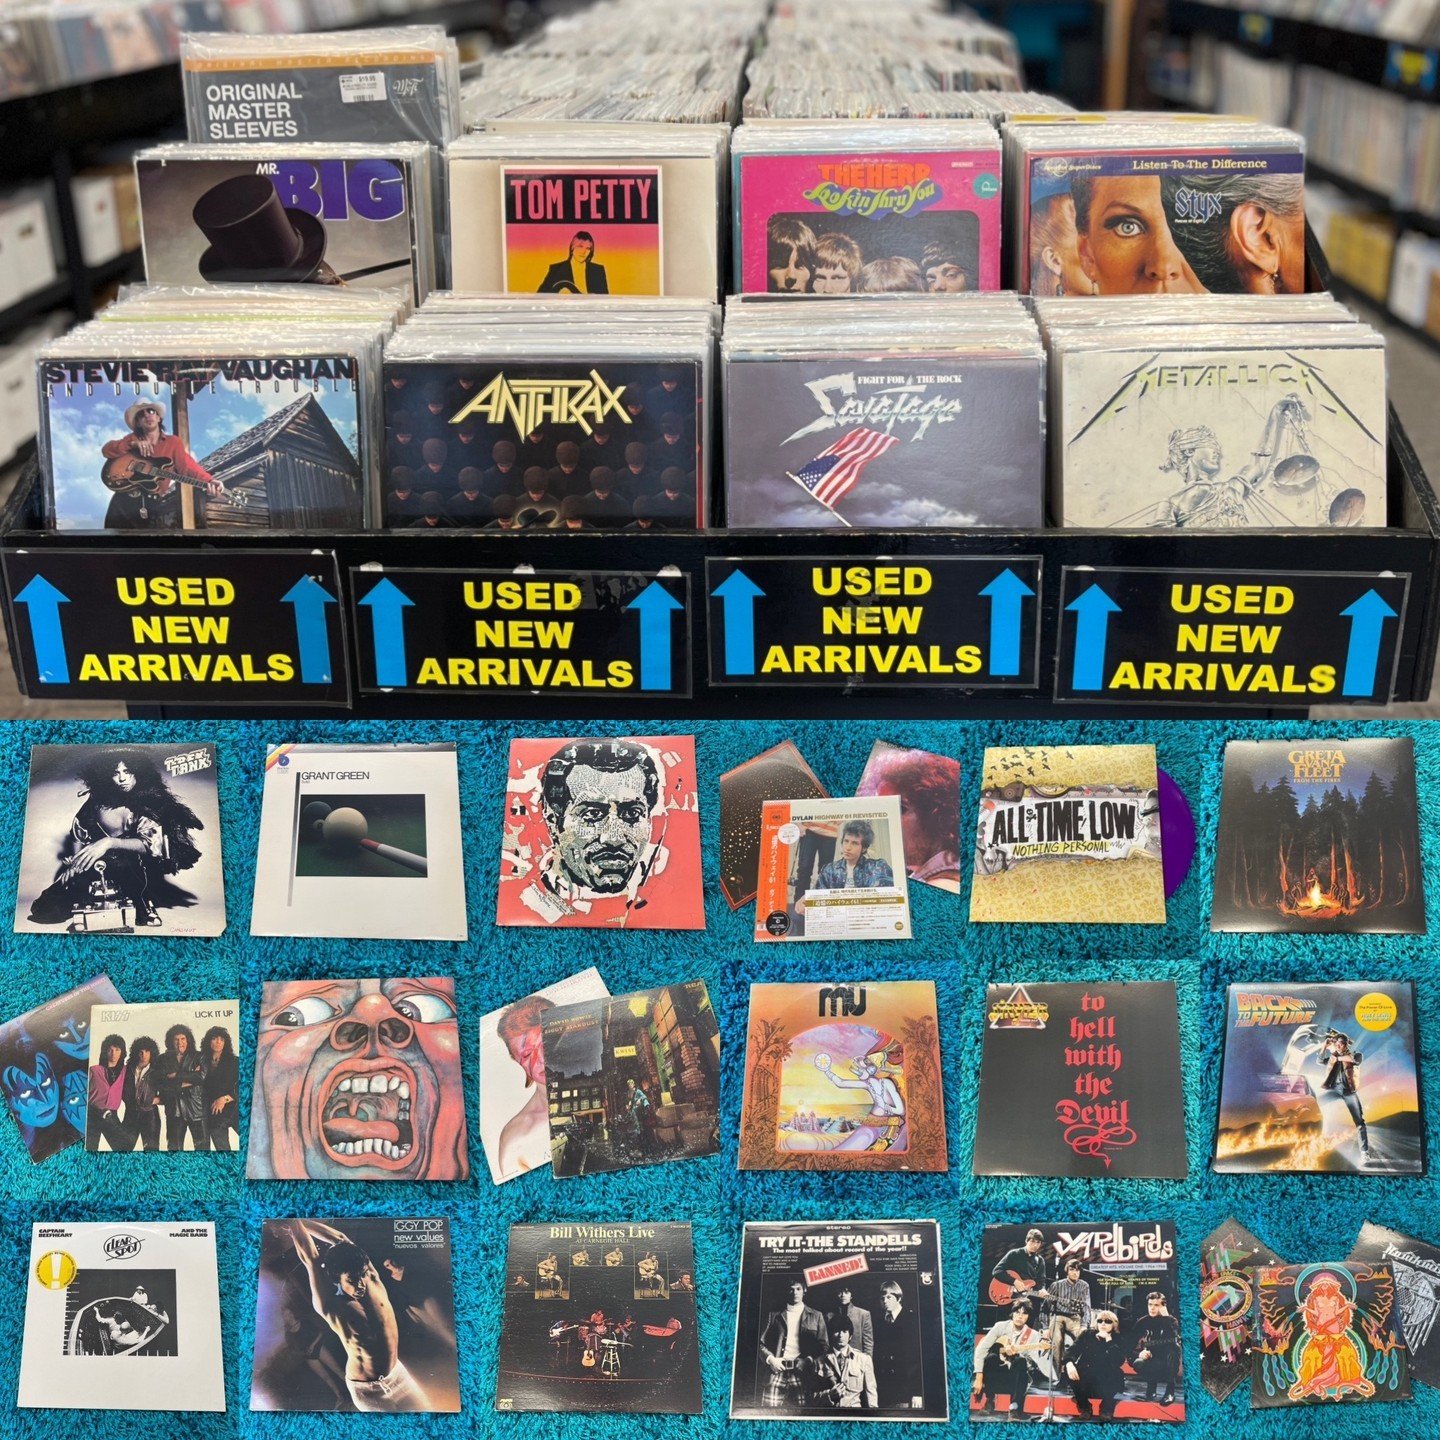 Another Great Weekend in store, and we have some great used titles hitting the floor on Saturday!  Most are super clean originals!  Check these out!  Mr Big, Tom Petty, The Herd (Early Peter Frampton), Styx (Nautilus 1/2 Speed Mastered), Stevie Ray V